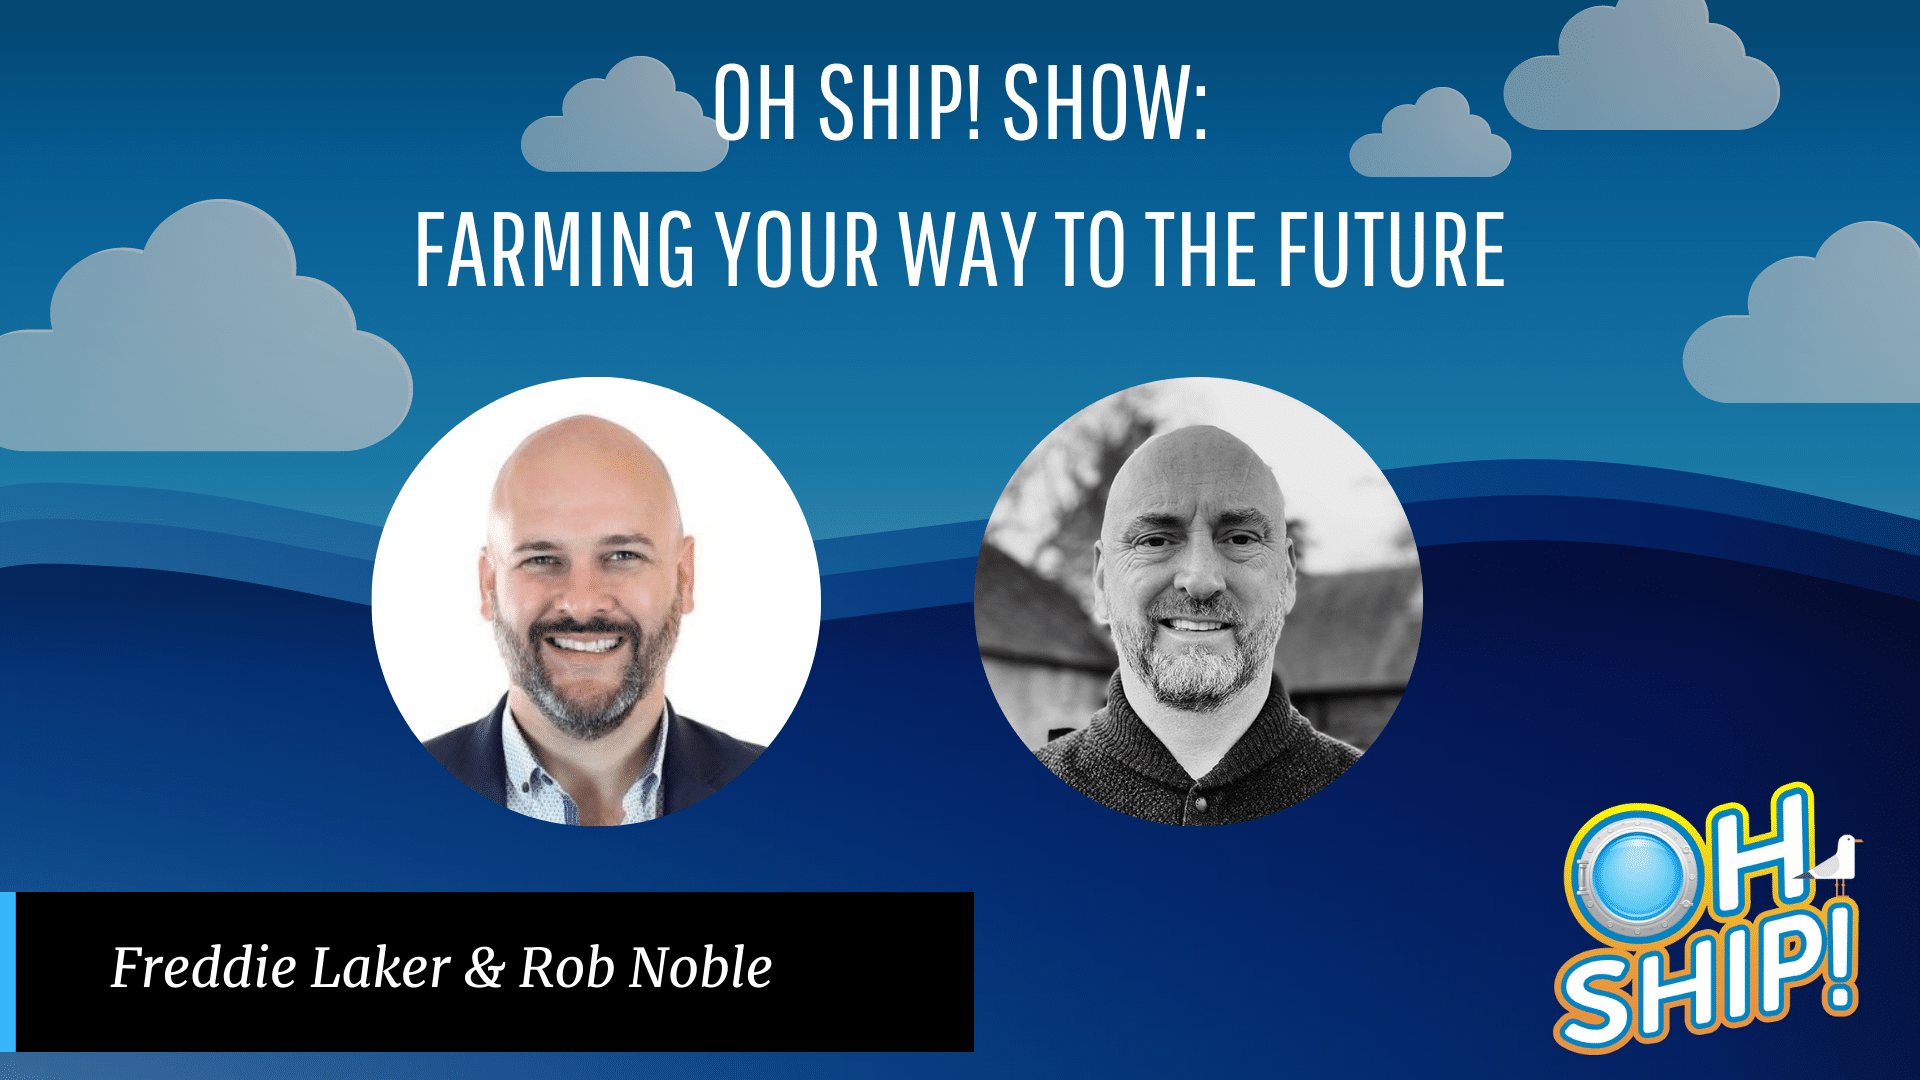 Promotional graphic for the "Oh Ship! Show" episode titled "Farming Your Way to the Future." It features headshots of Freddie Laker and Rob Noble against a blue background with clouds. The Oh Ship! logo at the bottom right corner ties it all together.